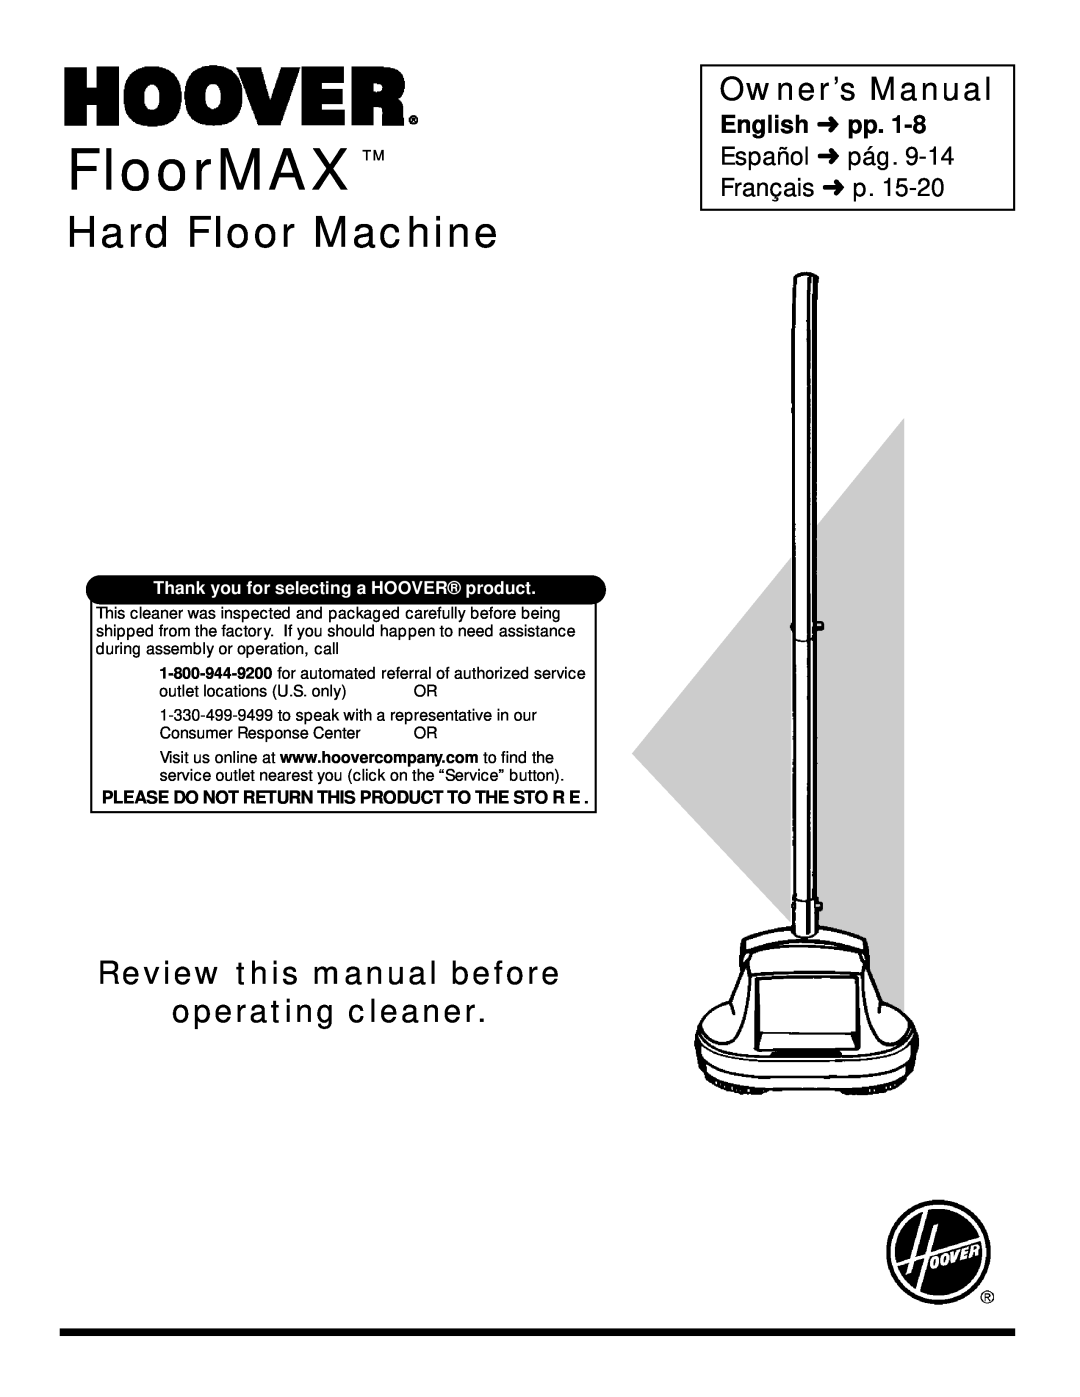 Hoover Hard Floor Machine owner manual Owner’s Manual, Review this manual before operating cleaner, F l o o r M A X TM 